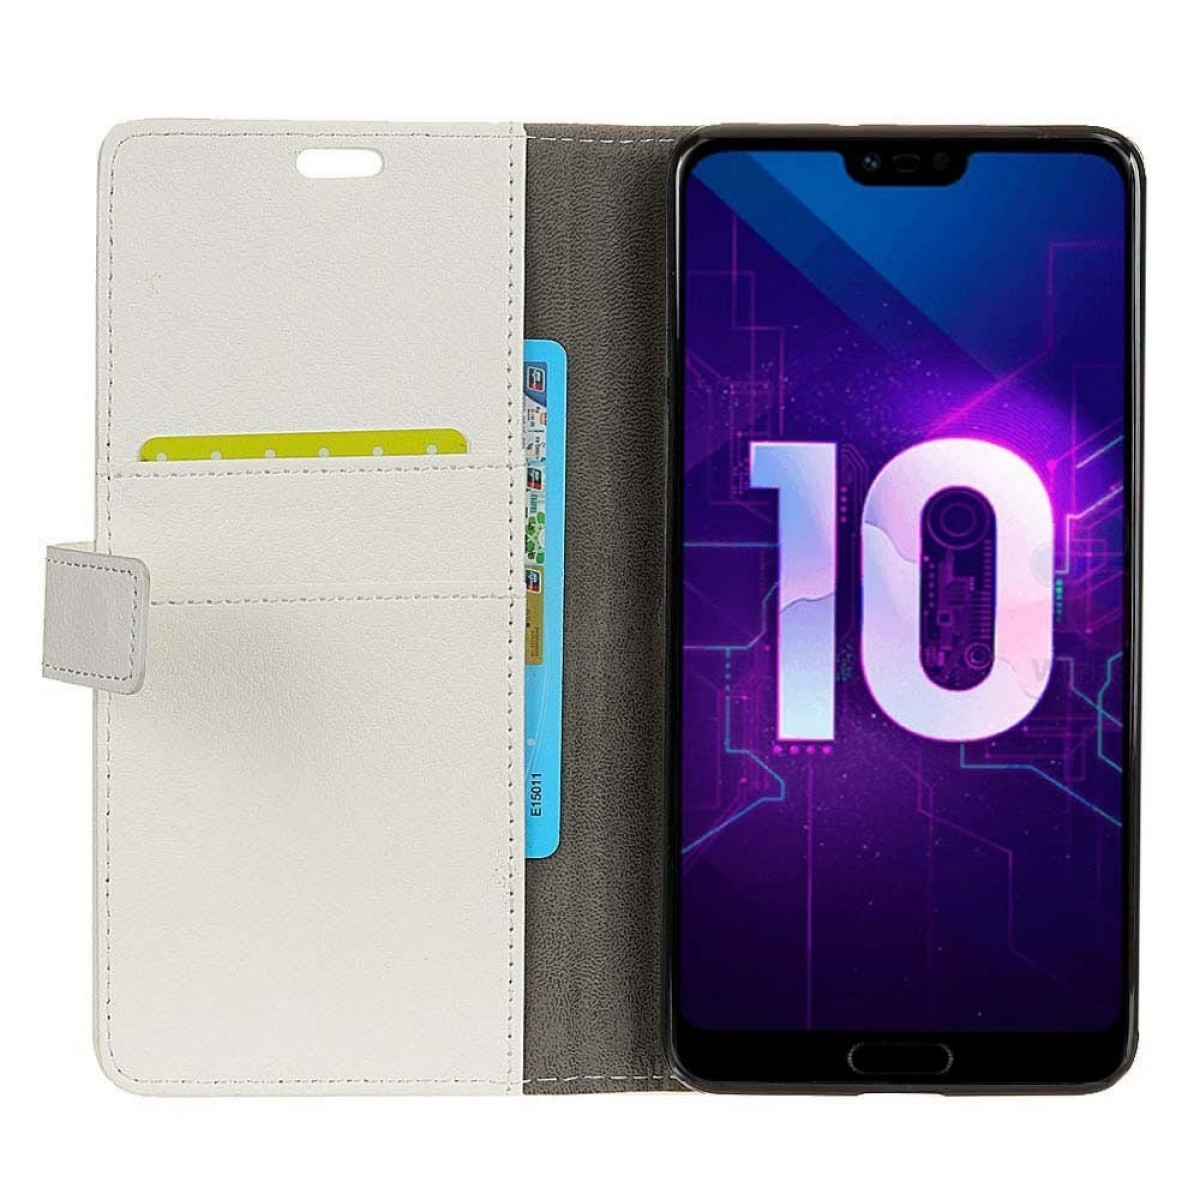 CASEONLINE - Klappbare Huawei, 10, Bookcover, Multicolor Honor Weiß,